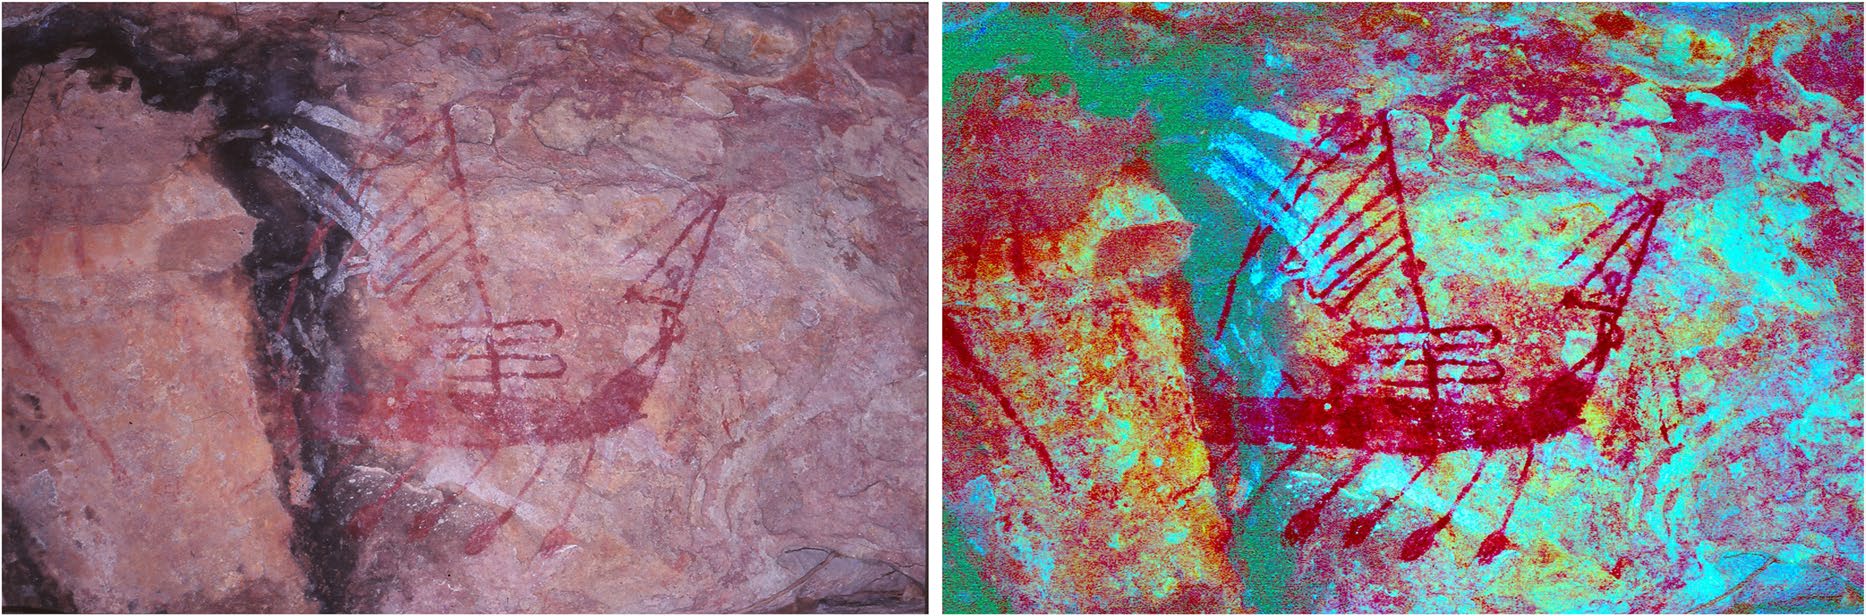 Two up-close images of rock art of ships